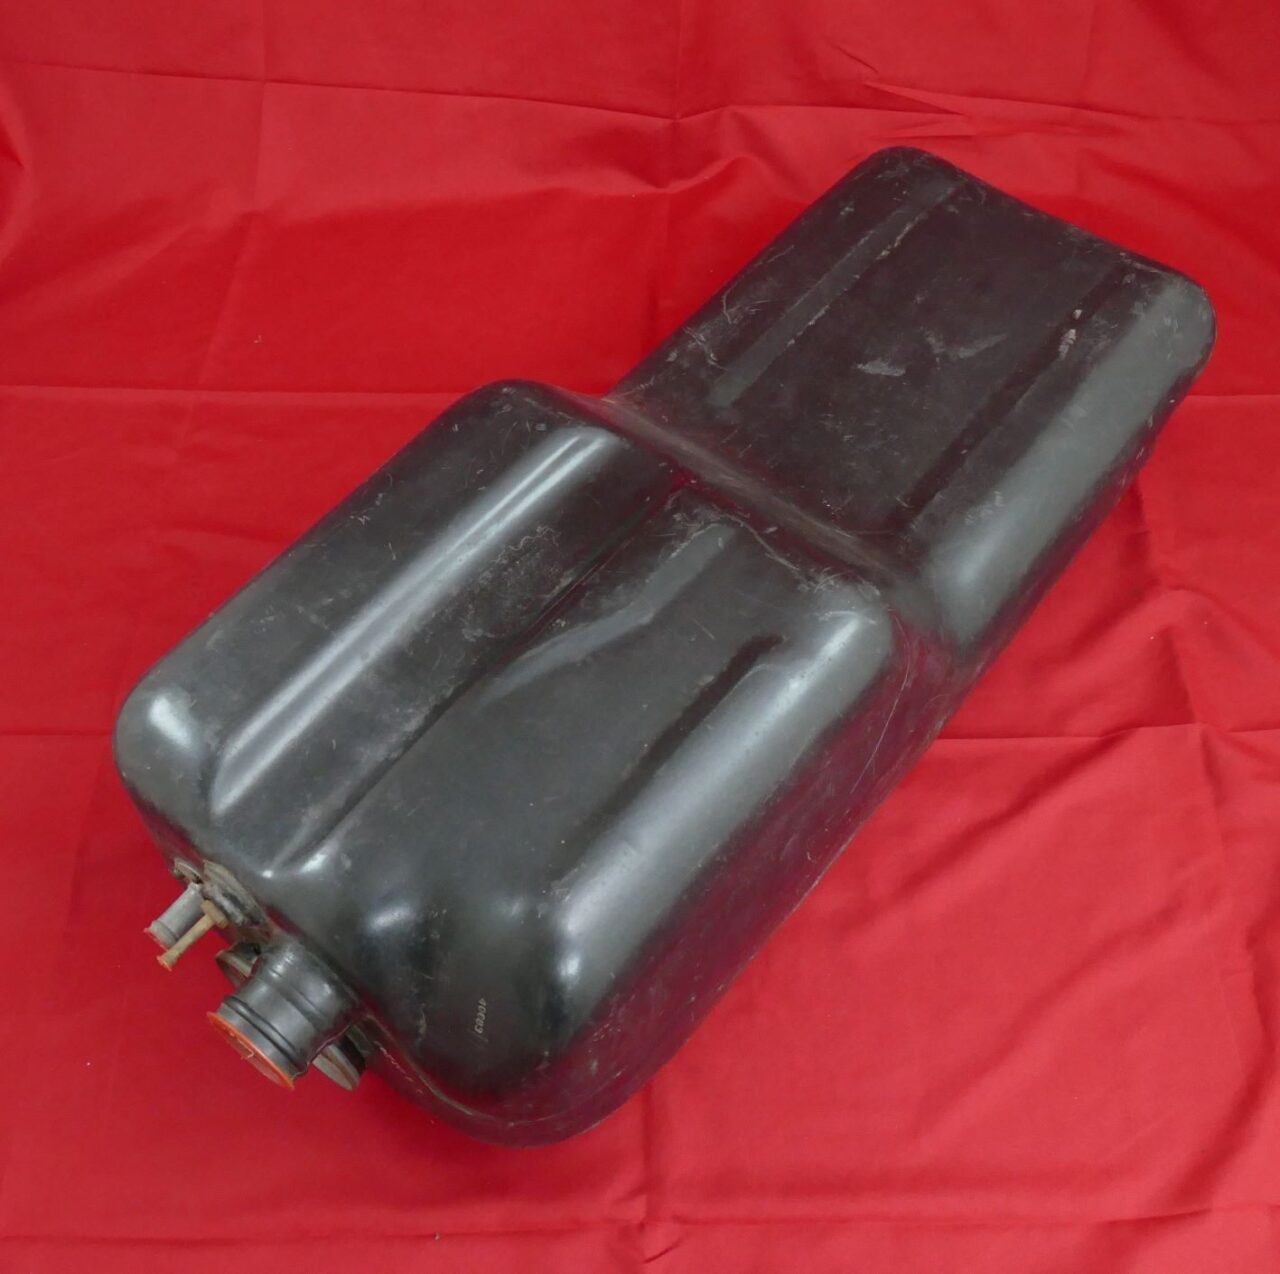 NOS Auxiliary Fuel / Gas Tank.